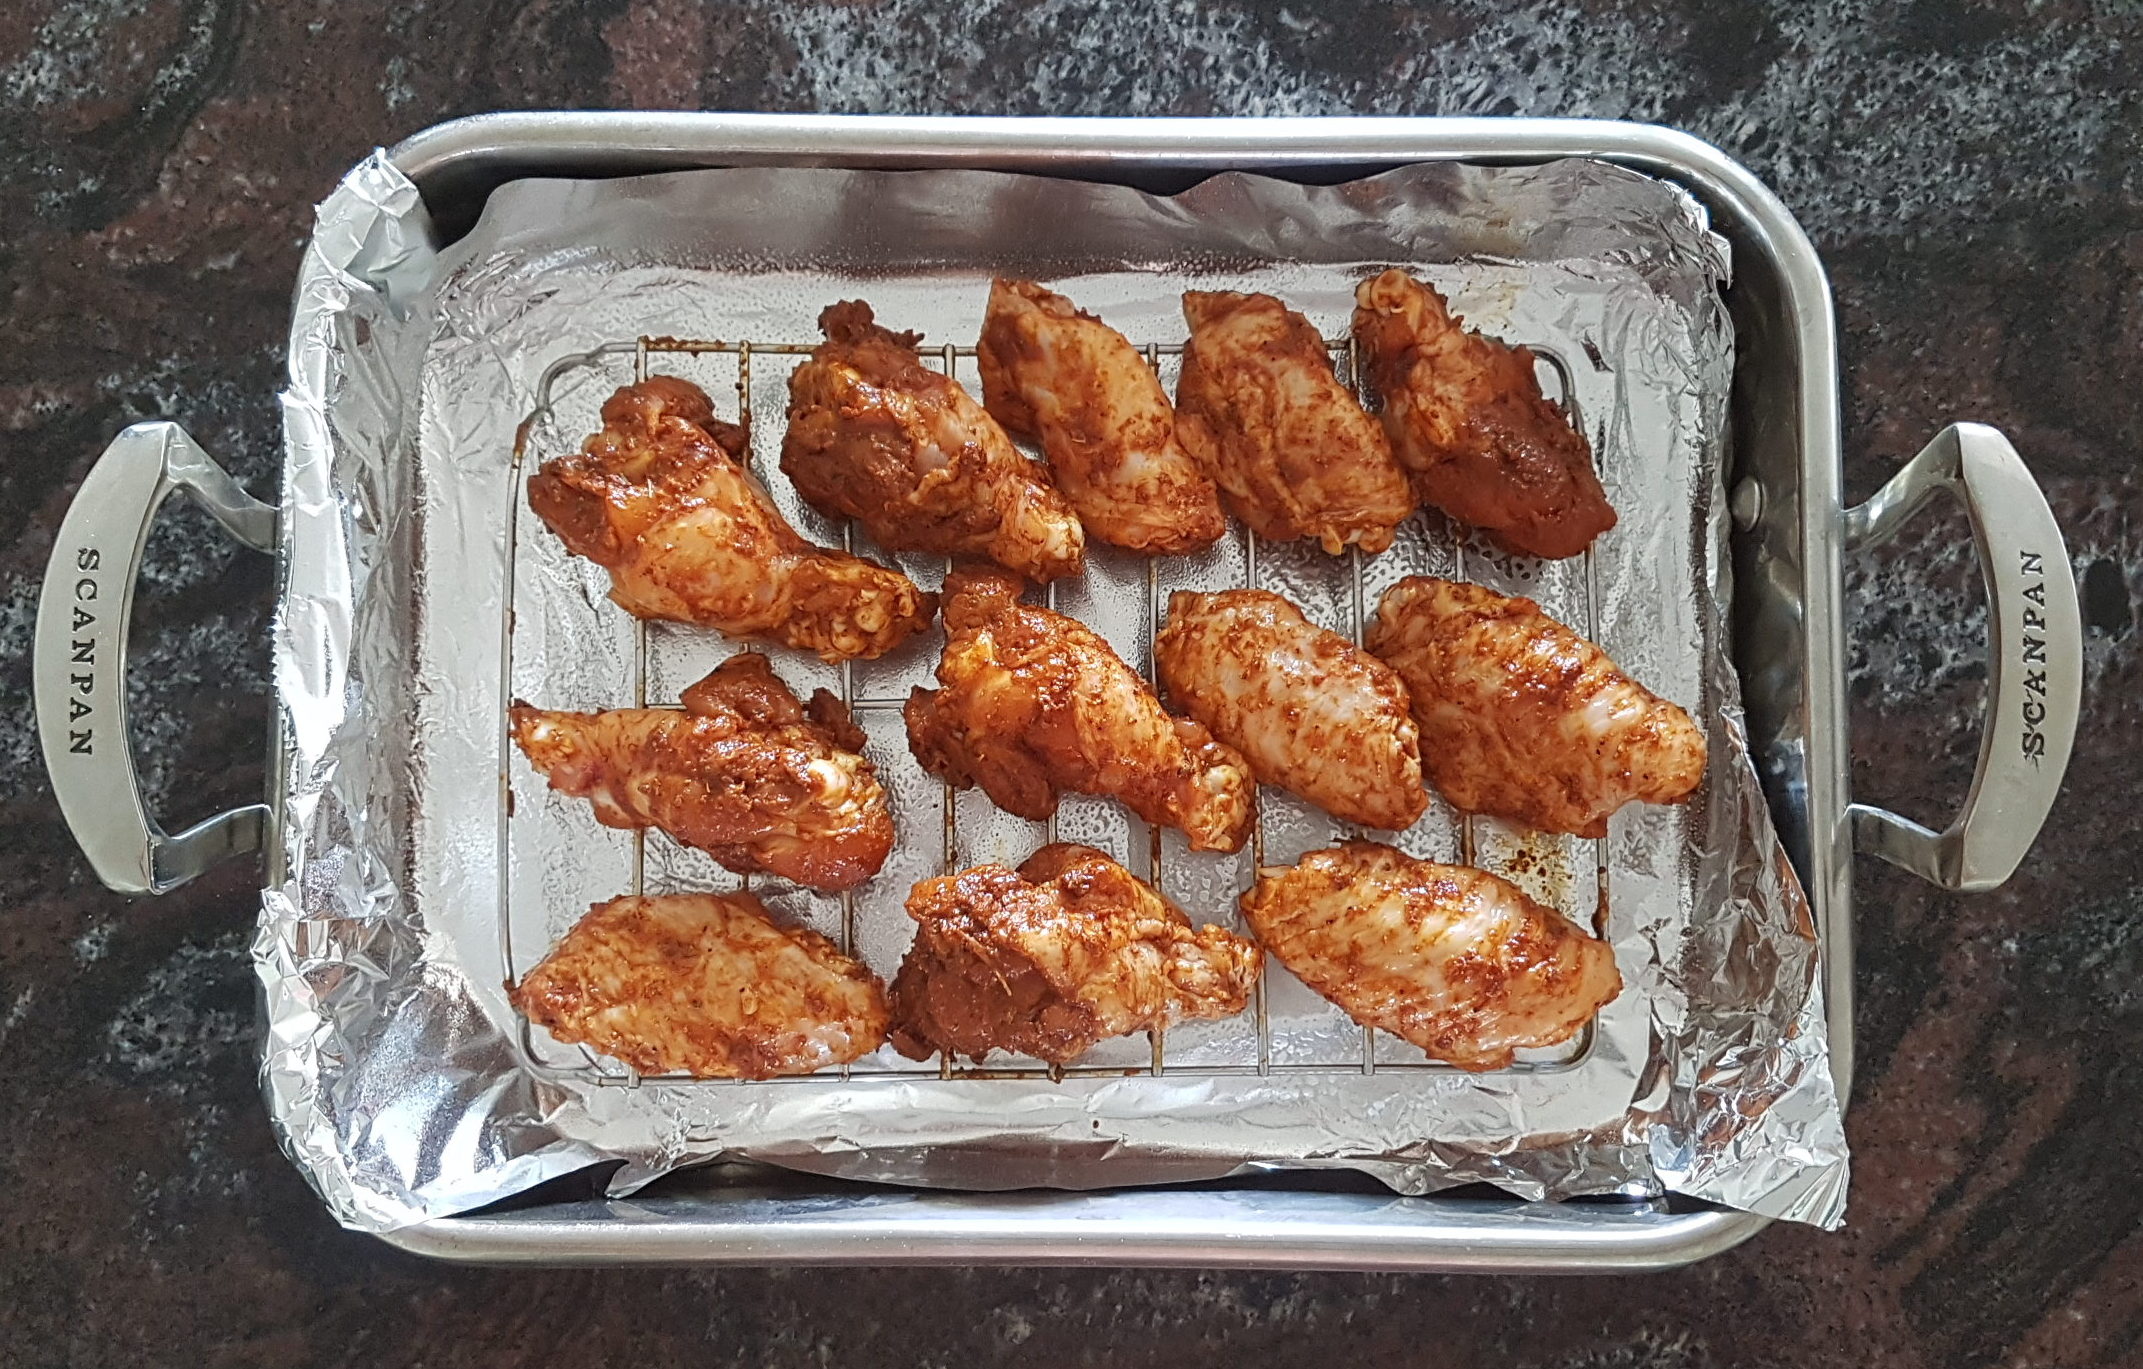 Ensure wings aren't touching each other on the baking rack